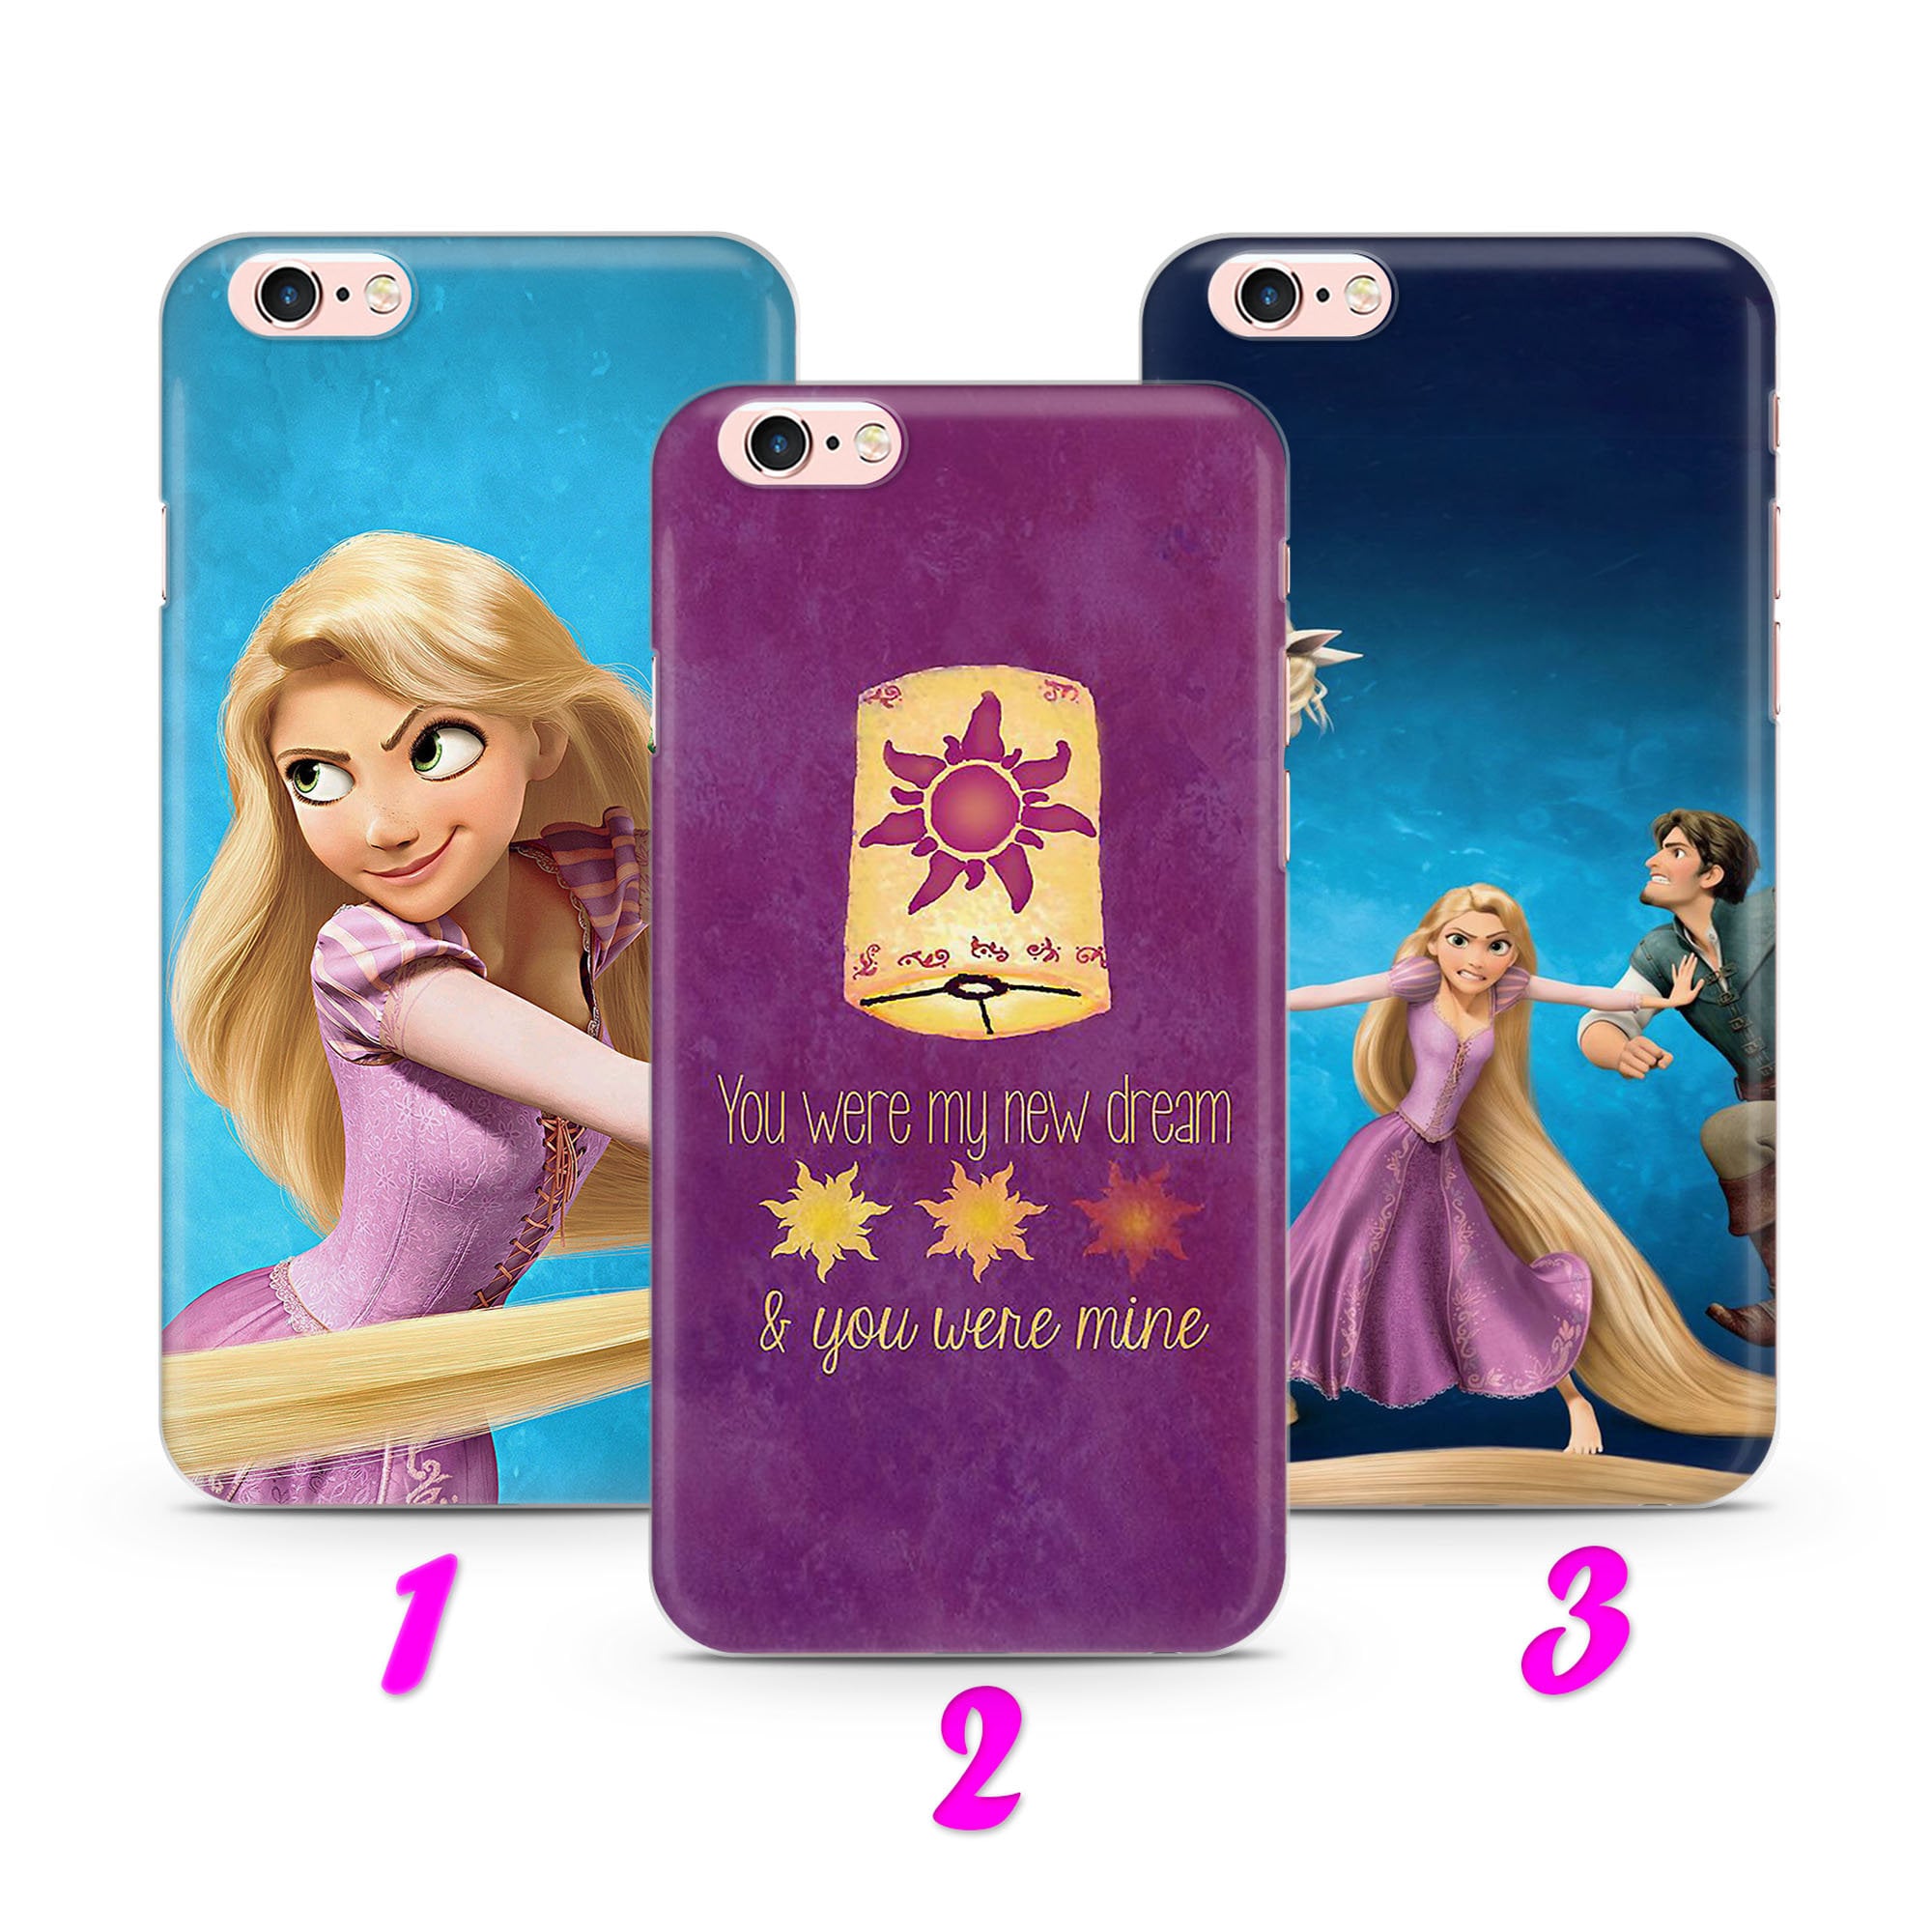 iPhone 4/4S Clear Case in Pink – Tangled